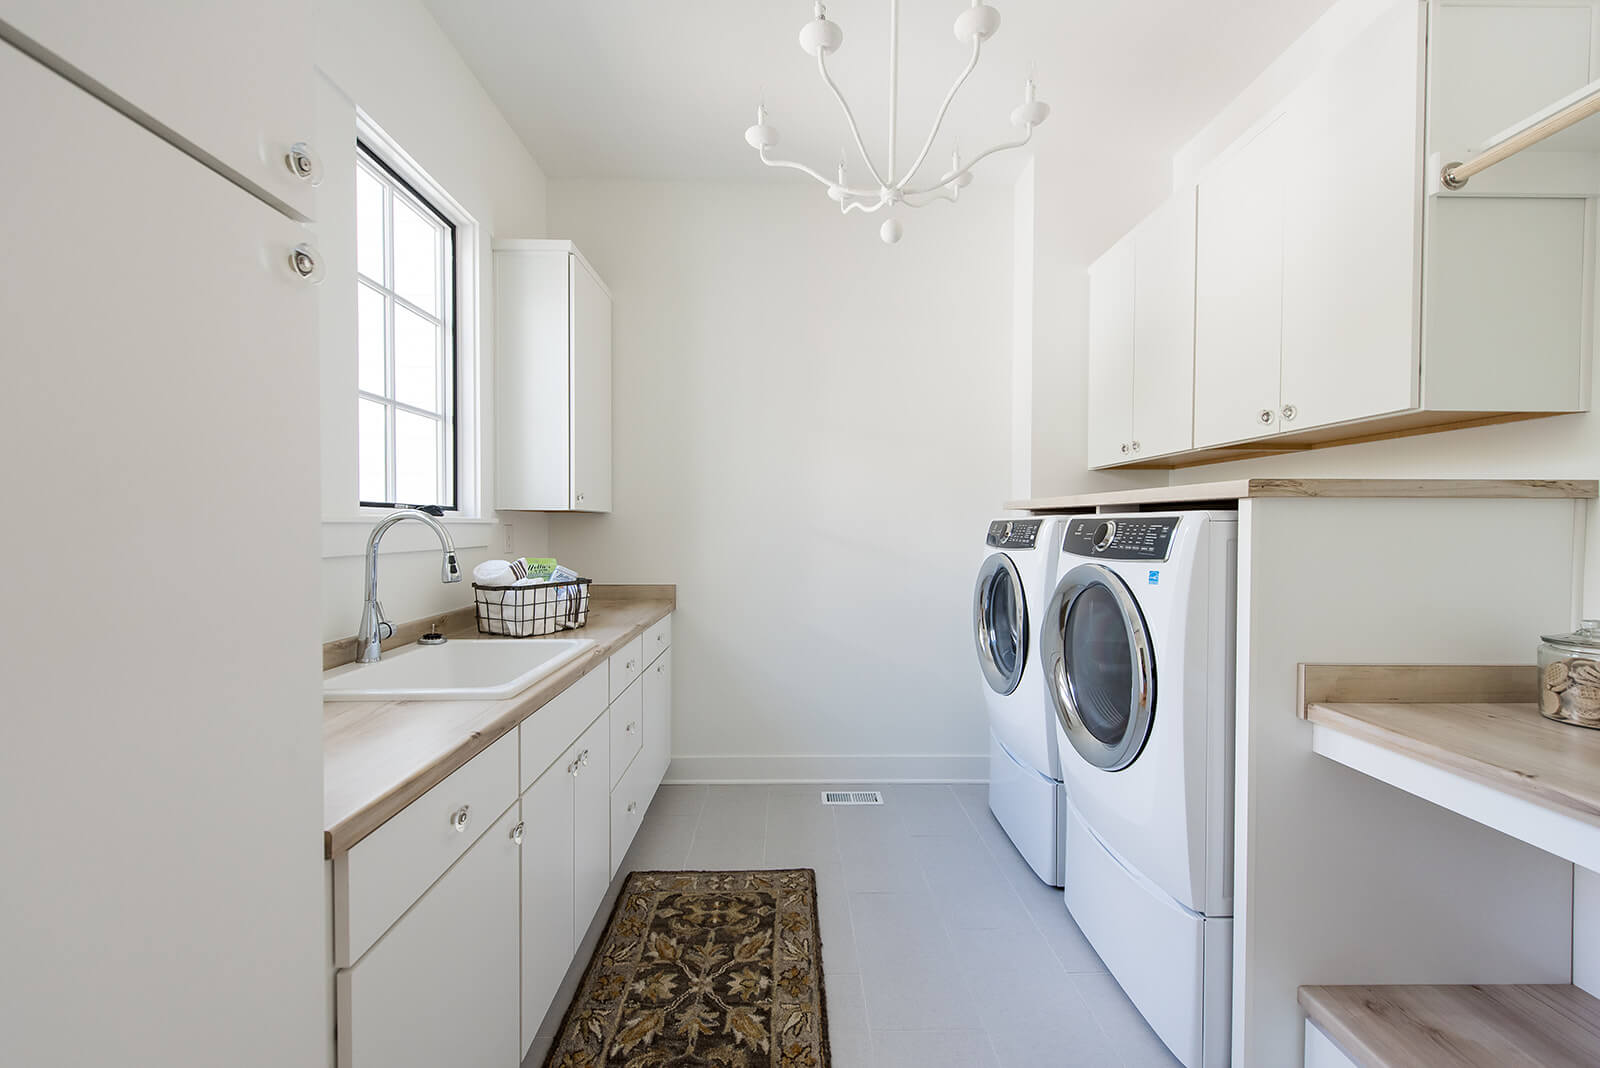 A naturally lit laundry room